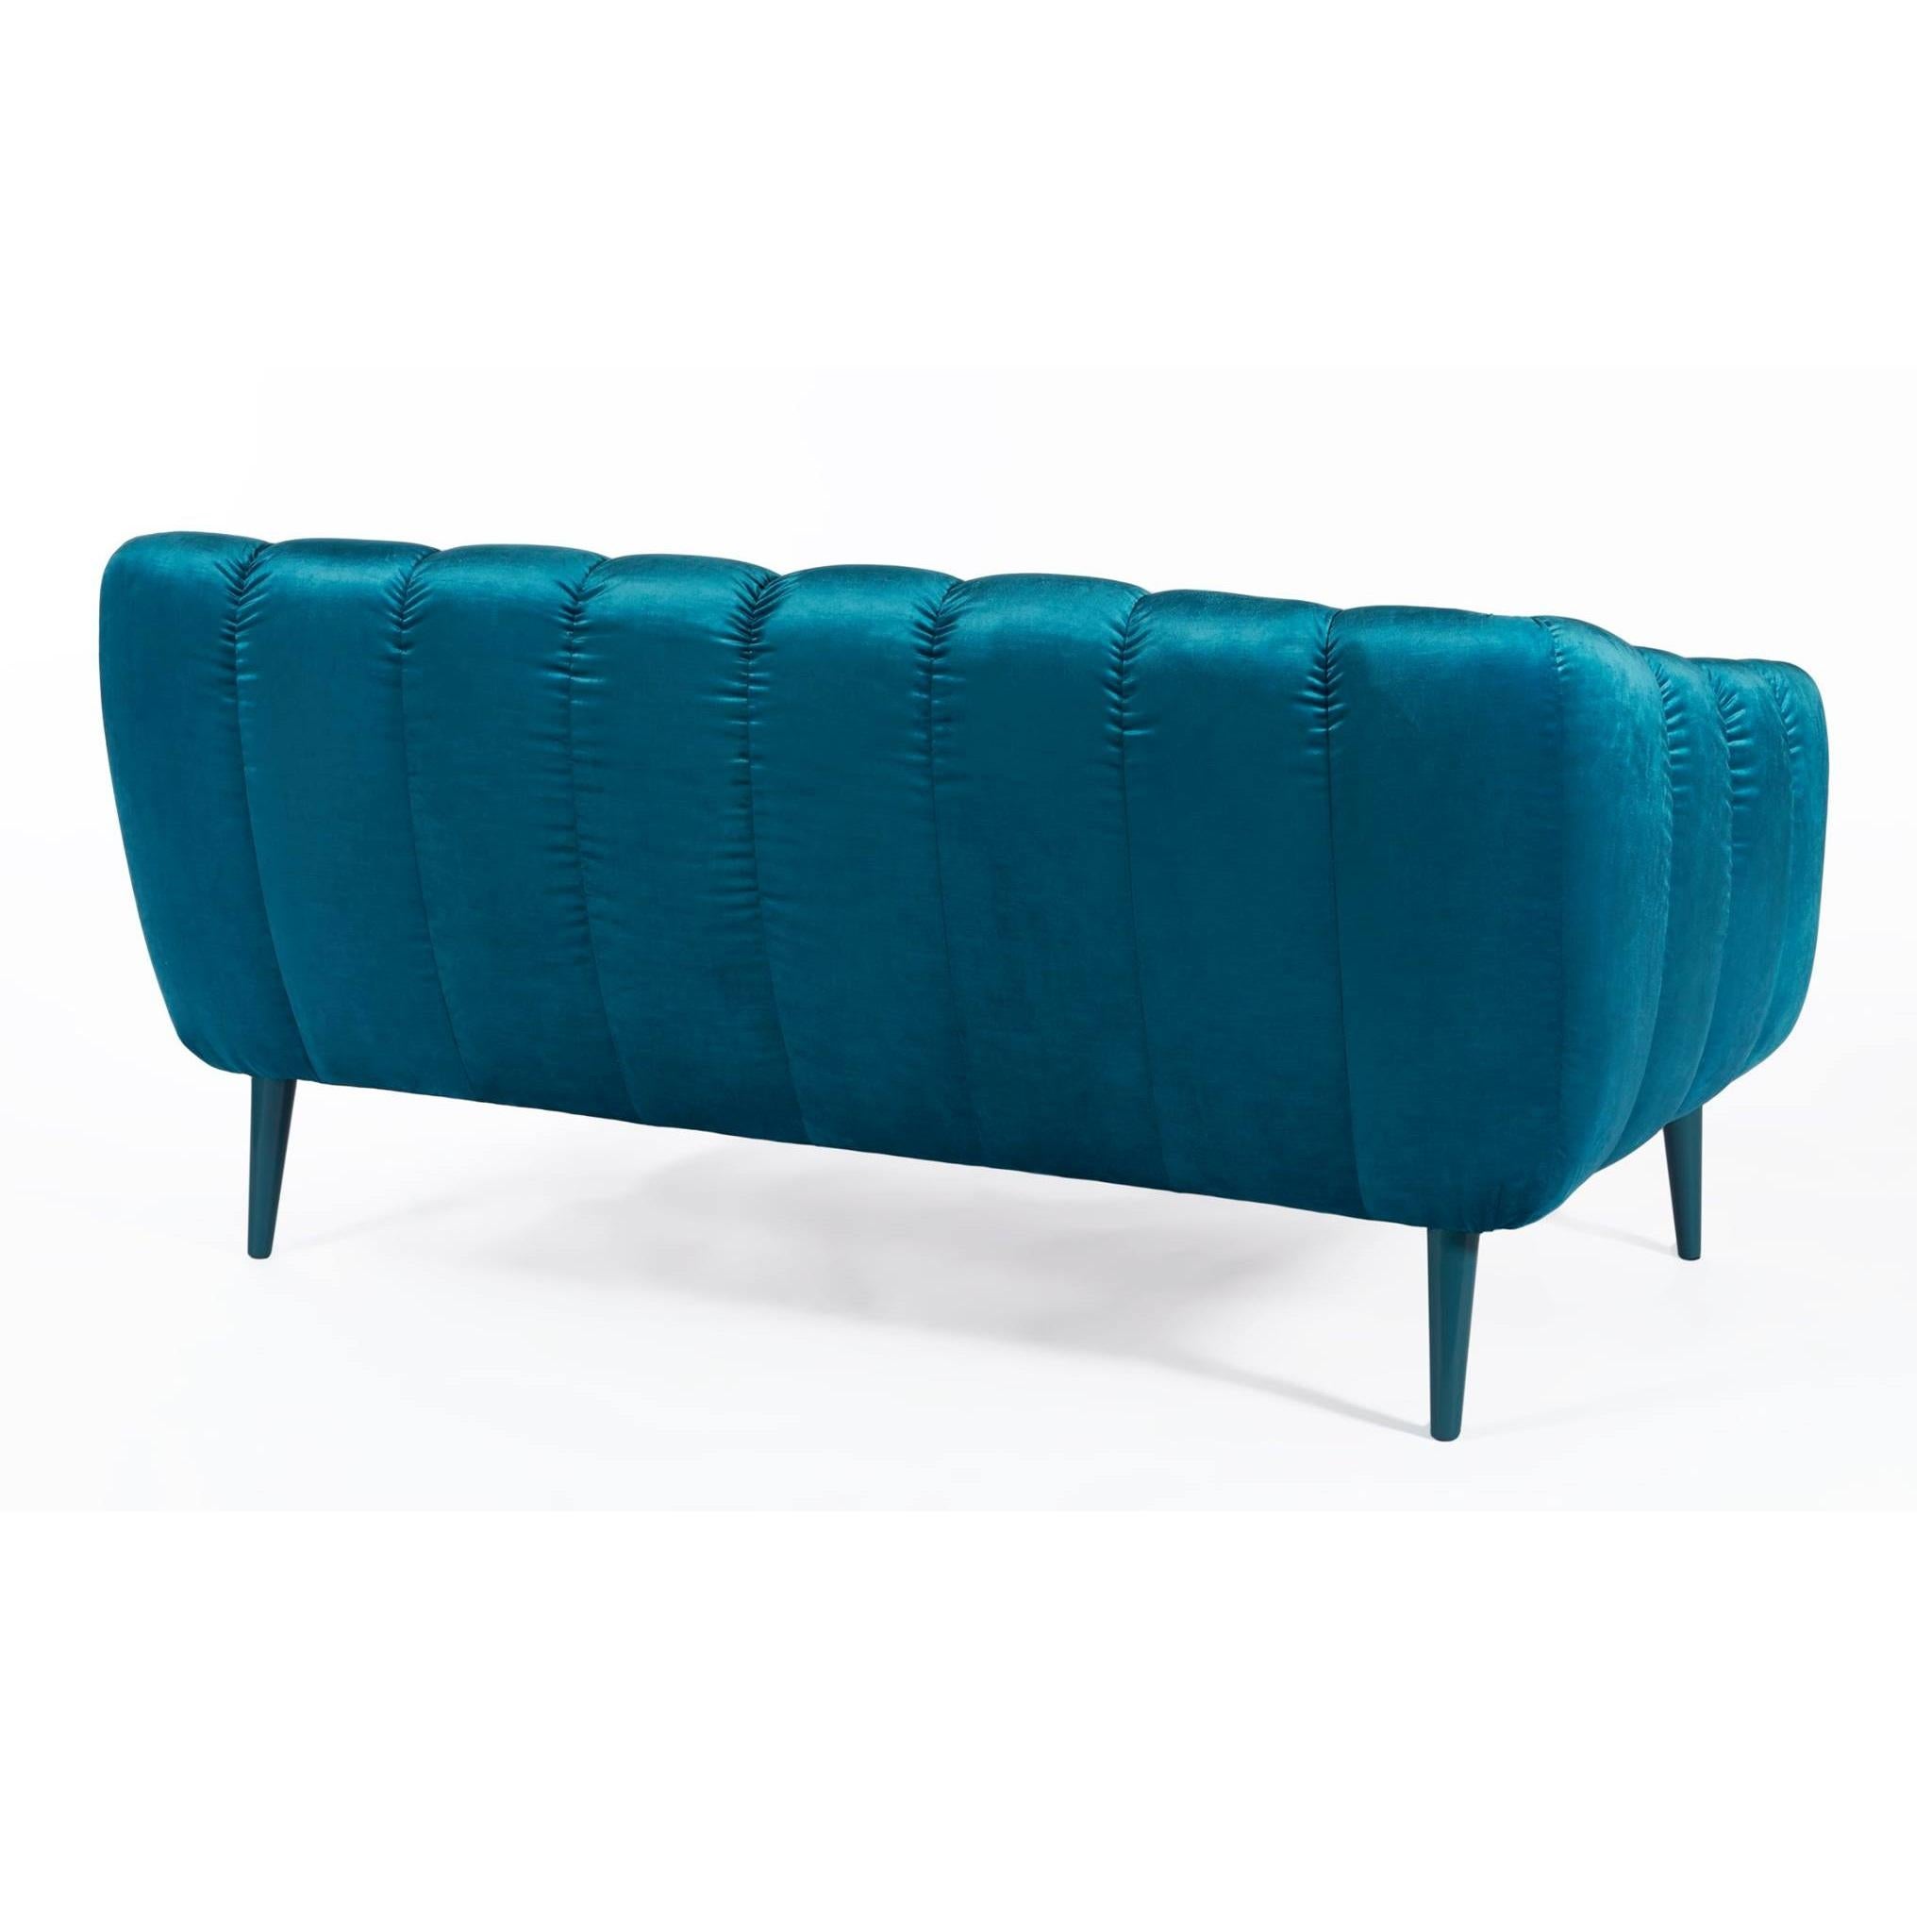 Designed with a thorough but playful attention to geometry and form, this sofa has a glamorous 60’s & 70’s sci-fi retro look. Its quilted upholstery is reminiscent of the midcentury aesthetic, with proportions suited for contemporary living